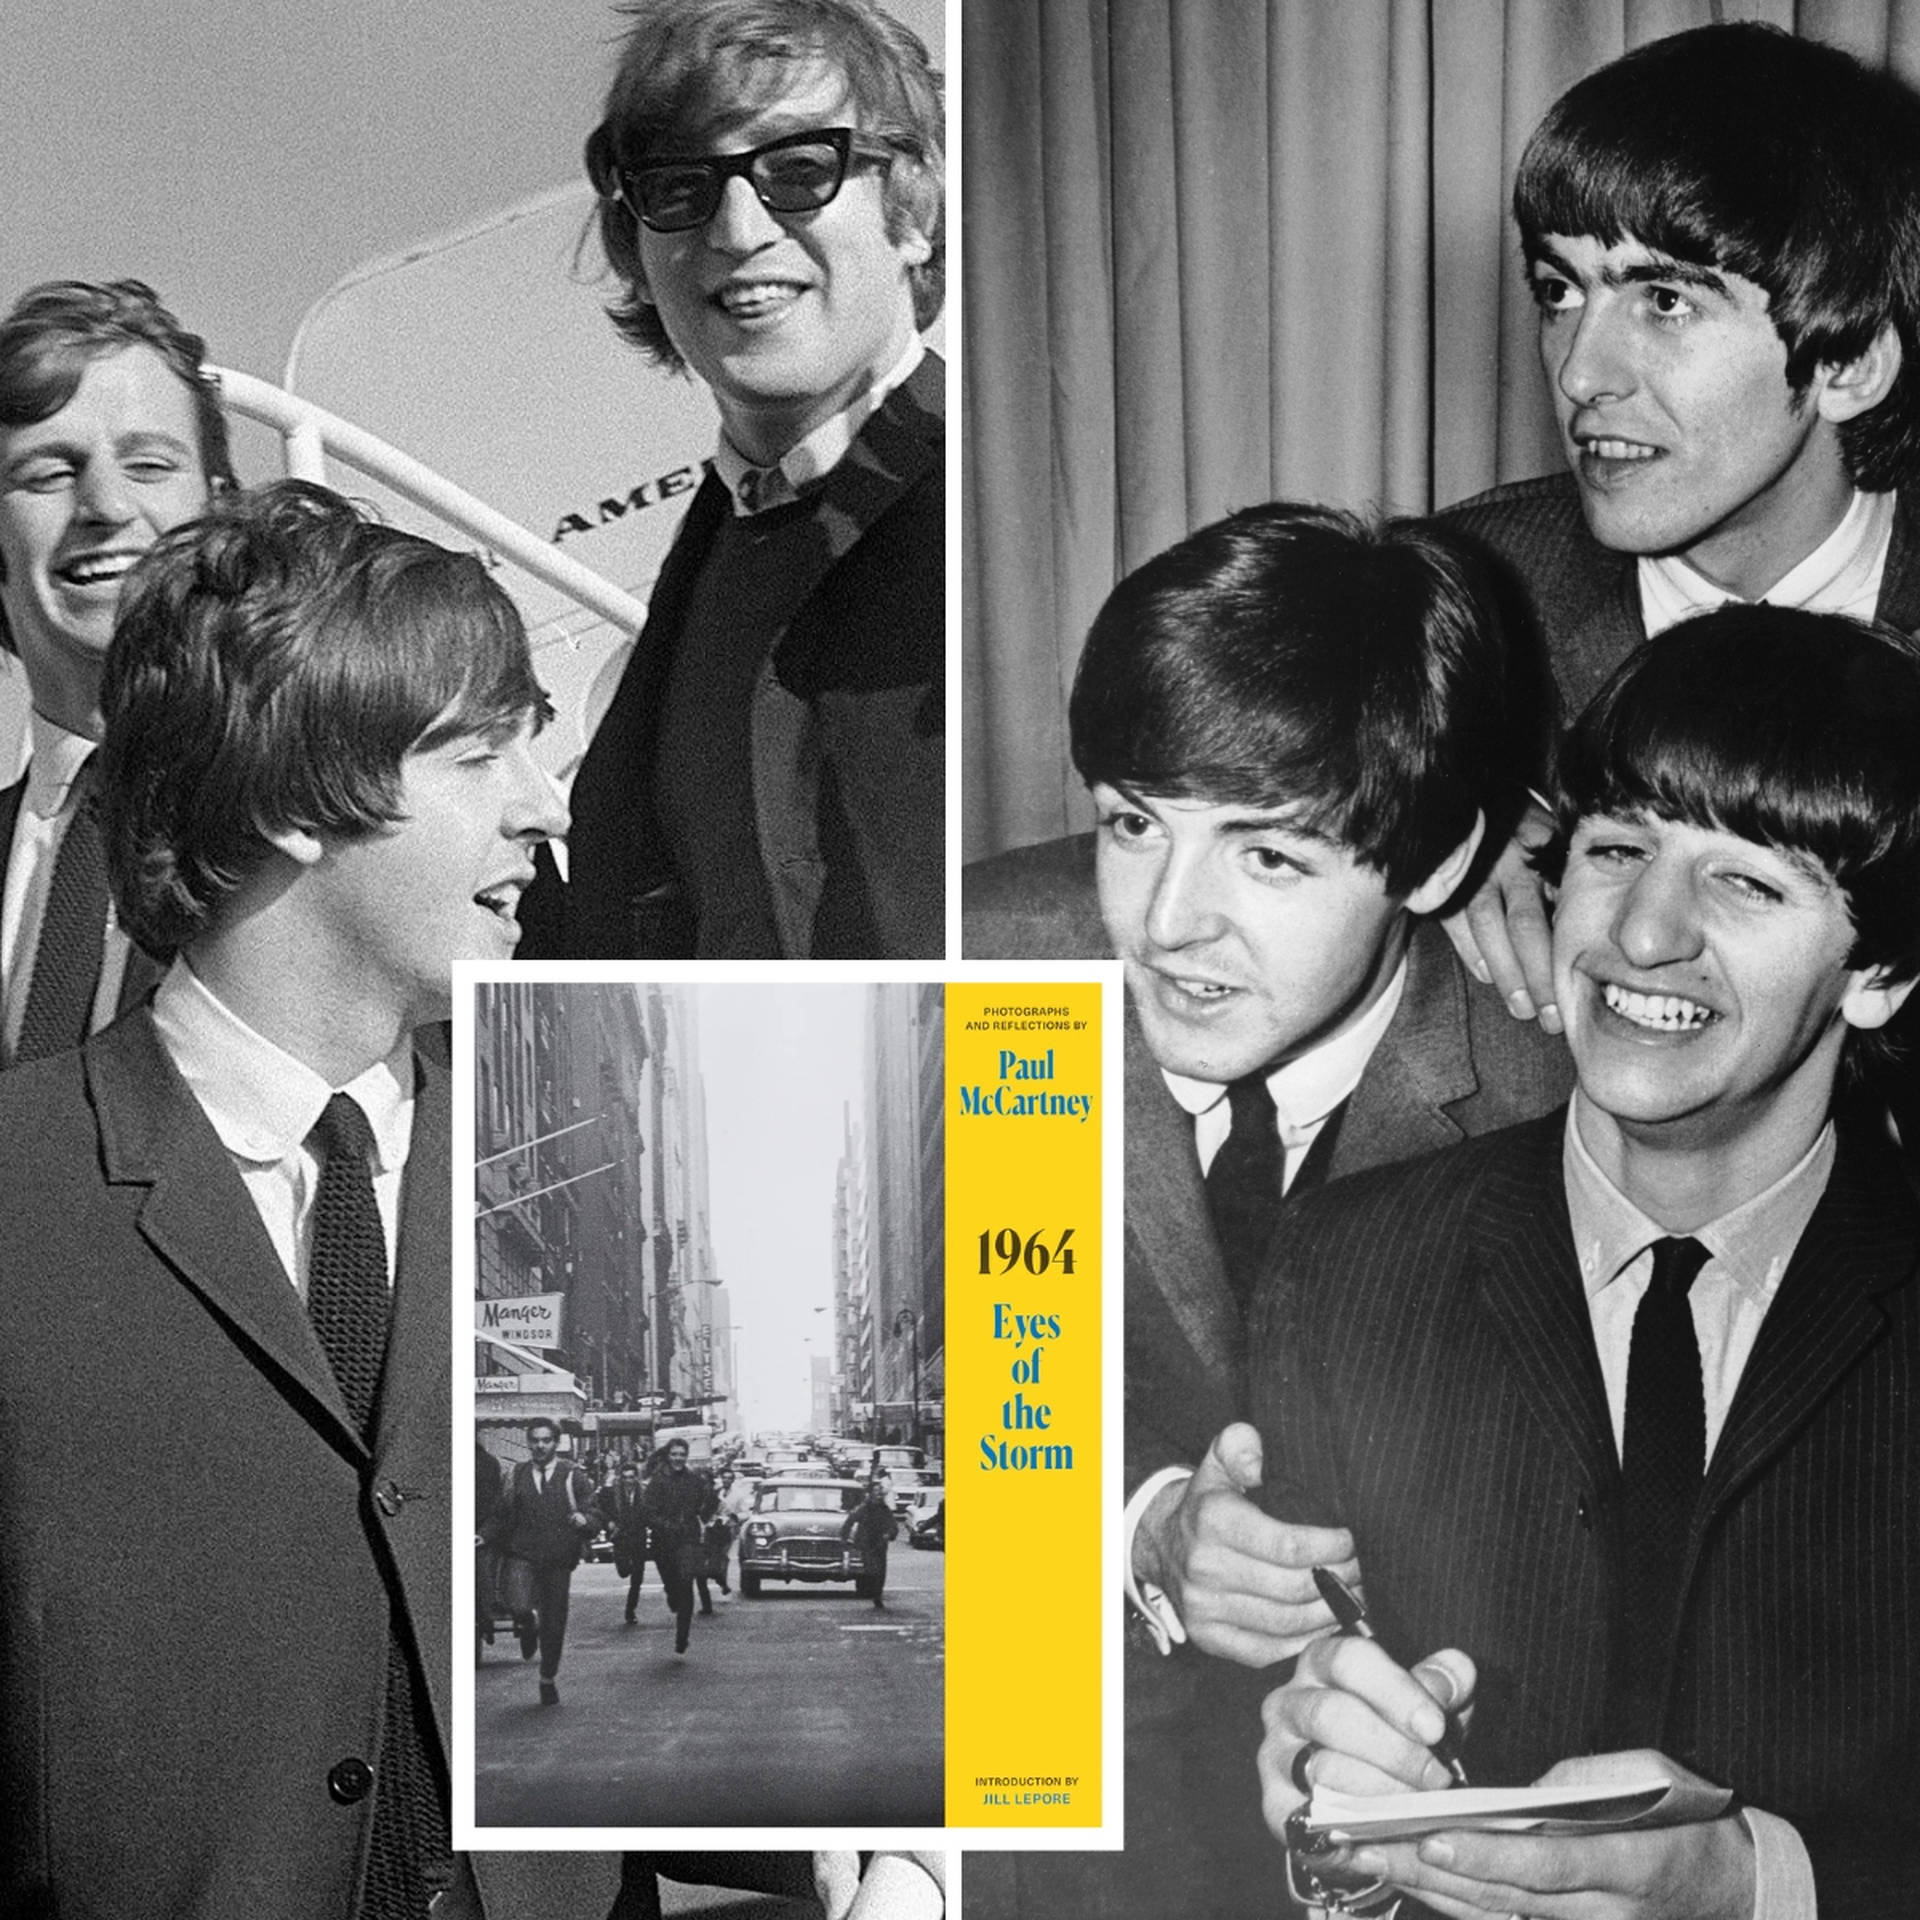 Paul McCartney is sharing his amazing early Beatles photos in a new book  and exhibition - Gold